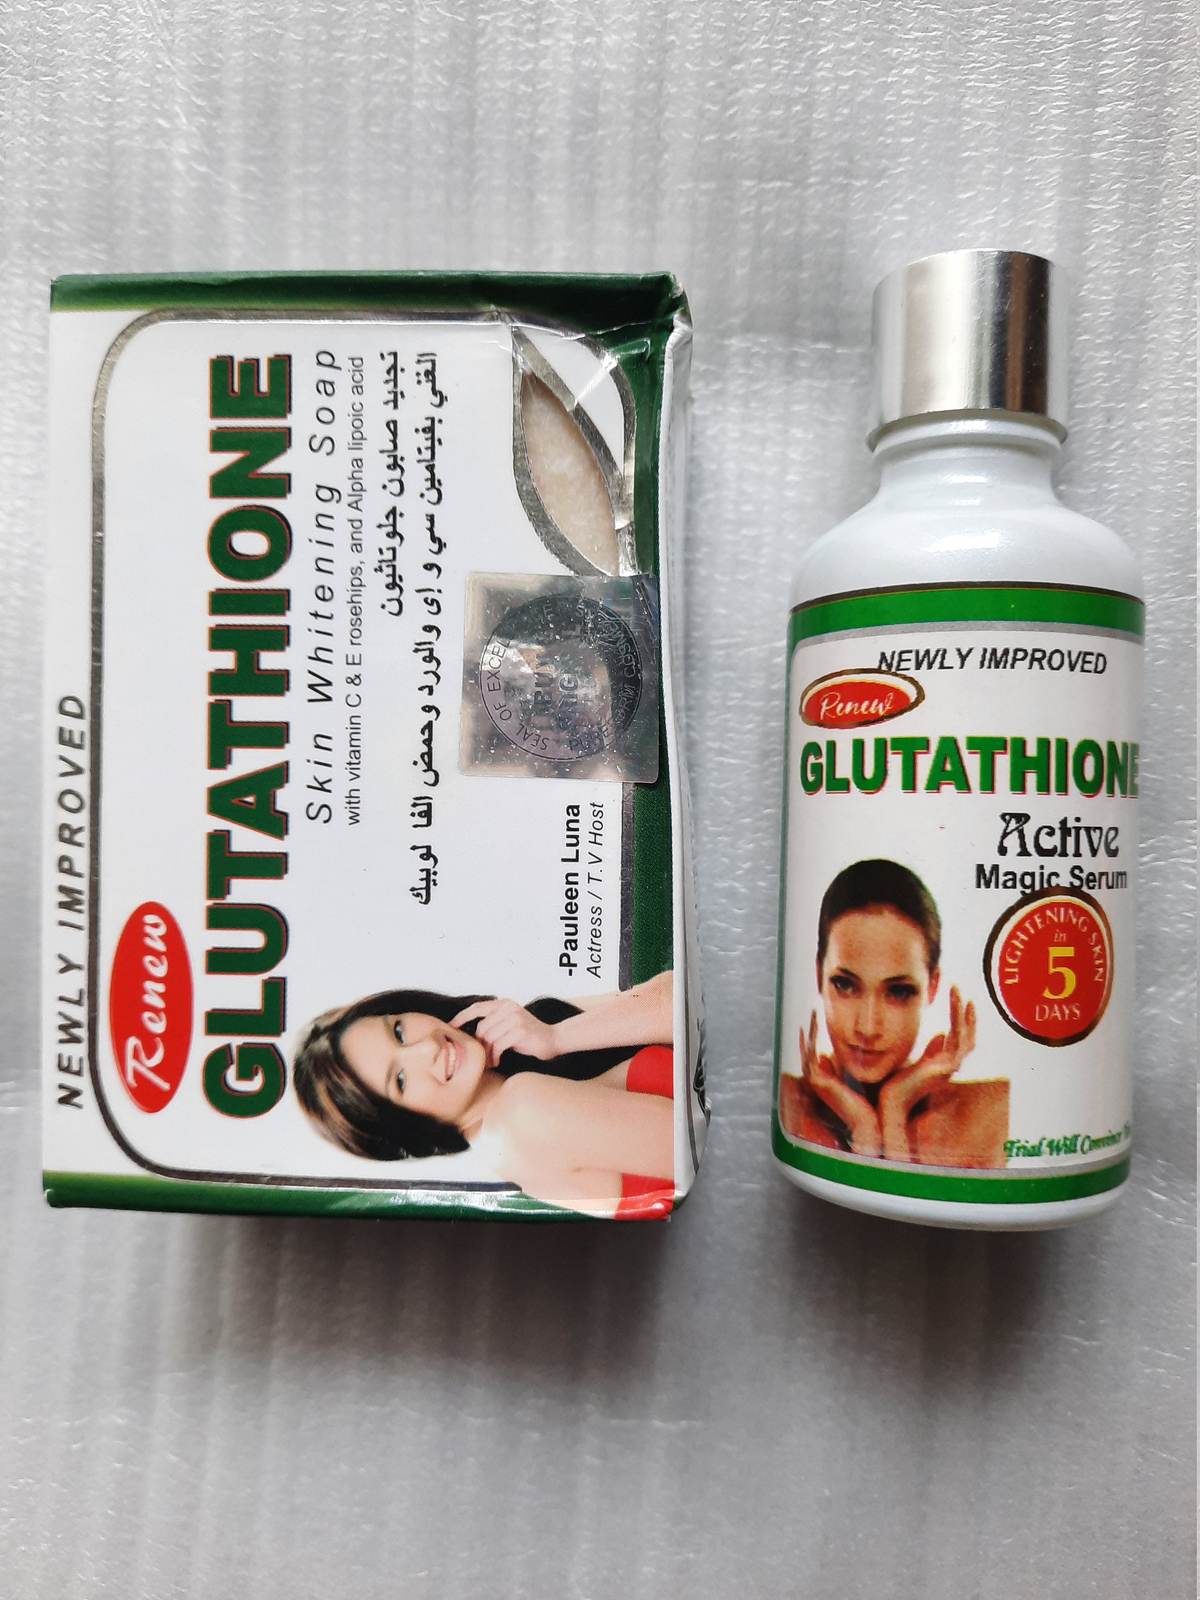 Primary image for Newly improved Glutathione whitening soap & serum with alpha liposuction acid + 